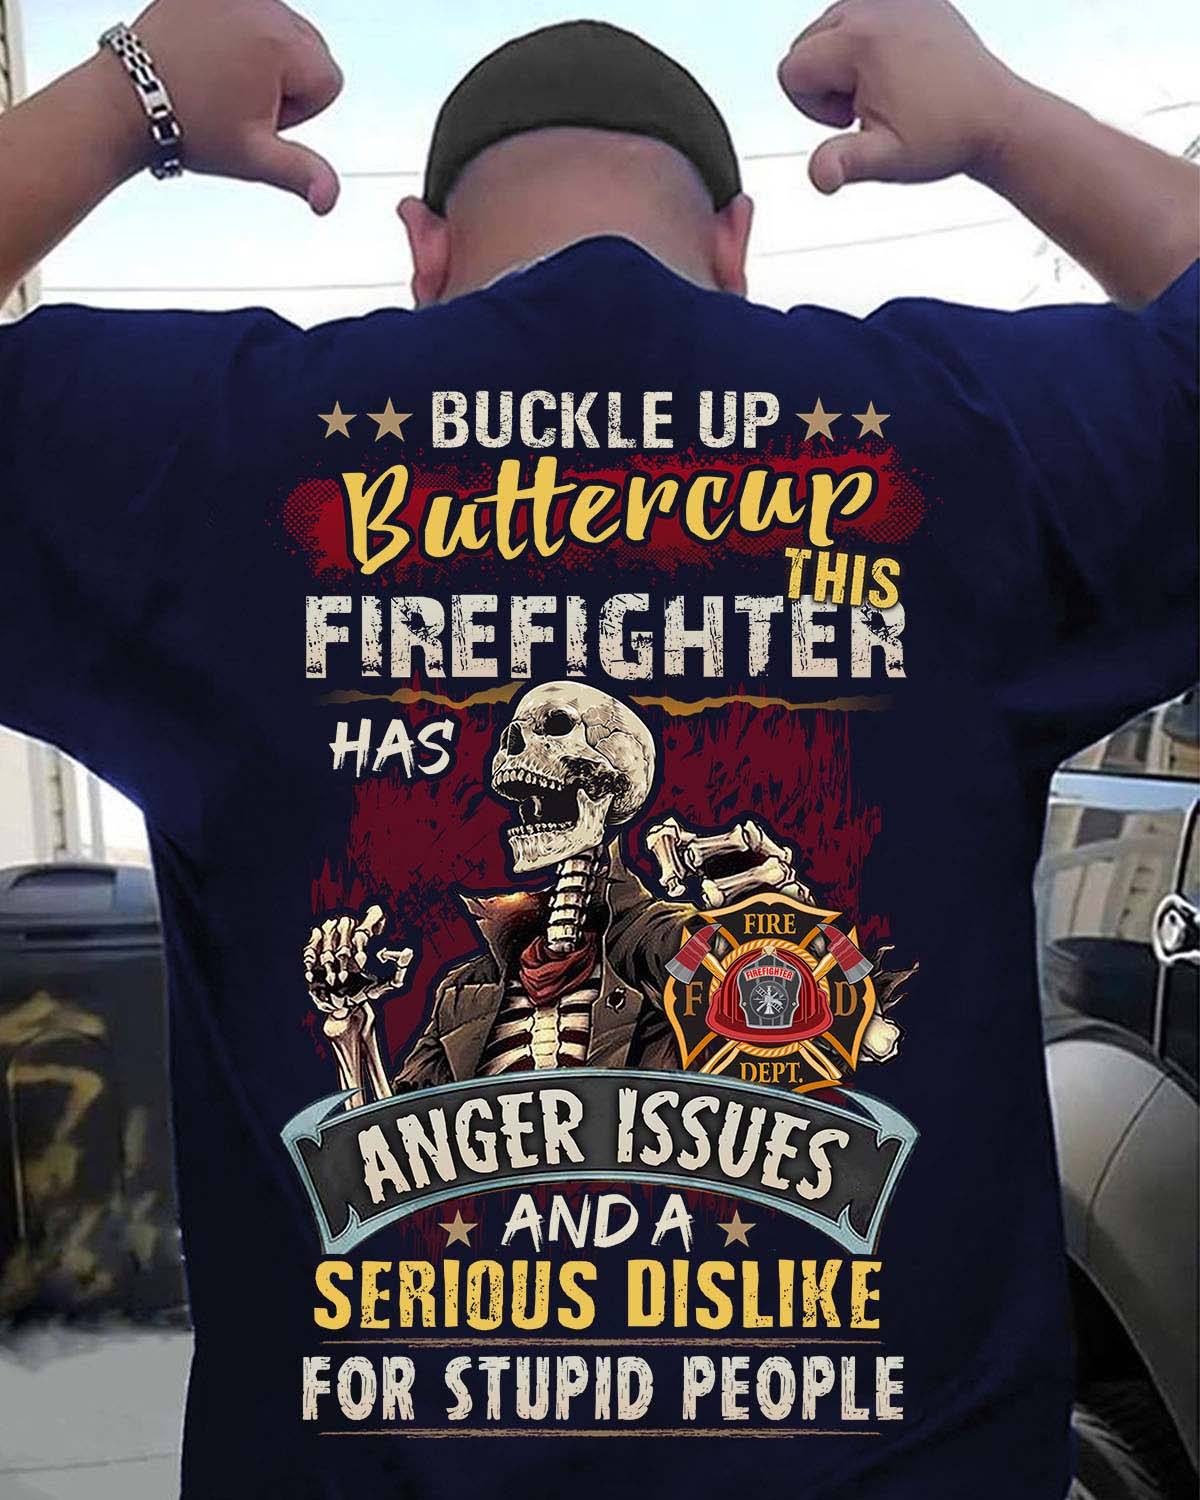 Buckle up buttercup this firefighter has anger issues - Evil firefighter